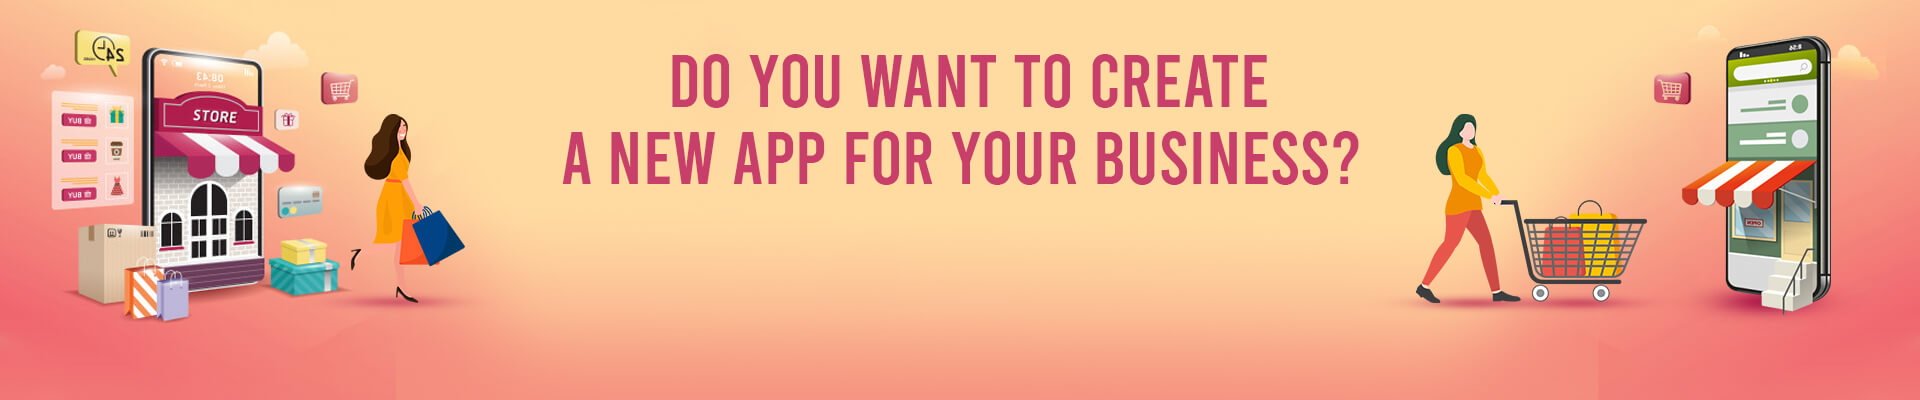 Do you want to create a new mobile app for your business? Keep these points in mind.